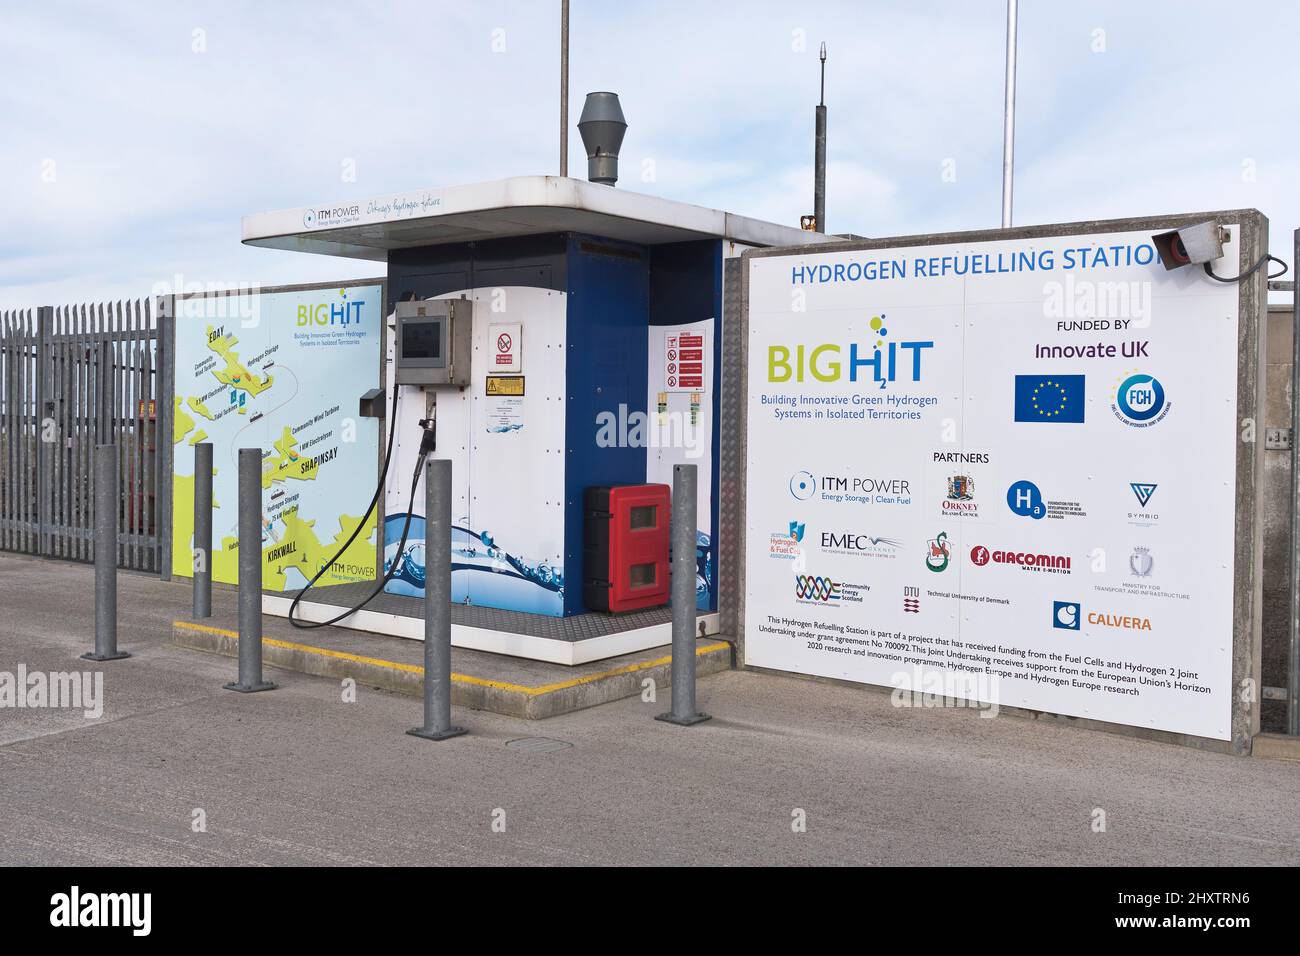 dh Hydrogen Fuel Station KIRKWALL ORKNEY Refuelling stations using tidal and wave sources renewables power uk Stock Photo